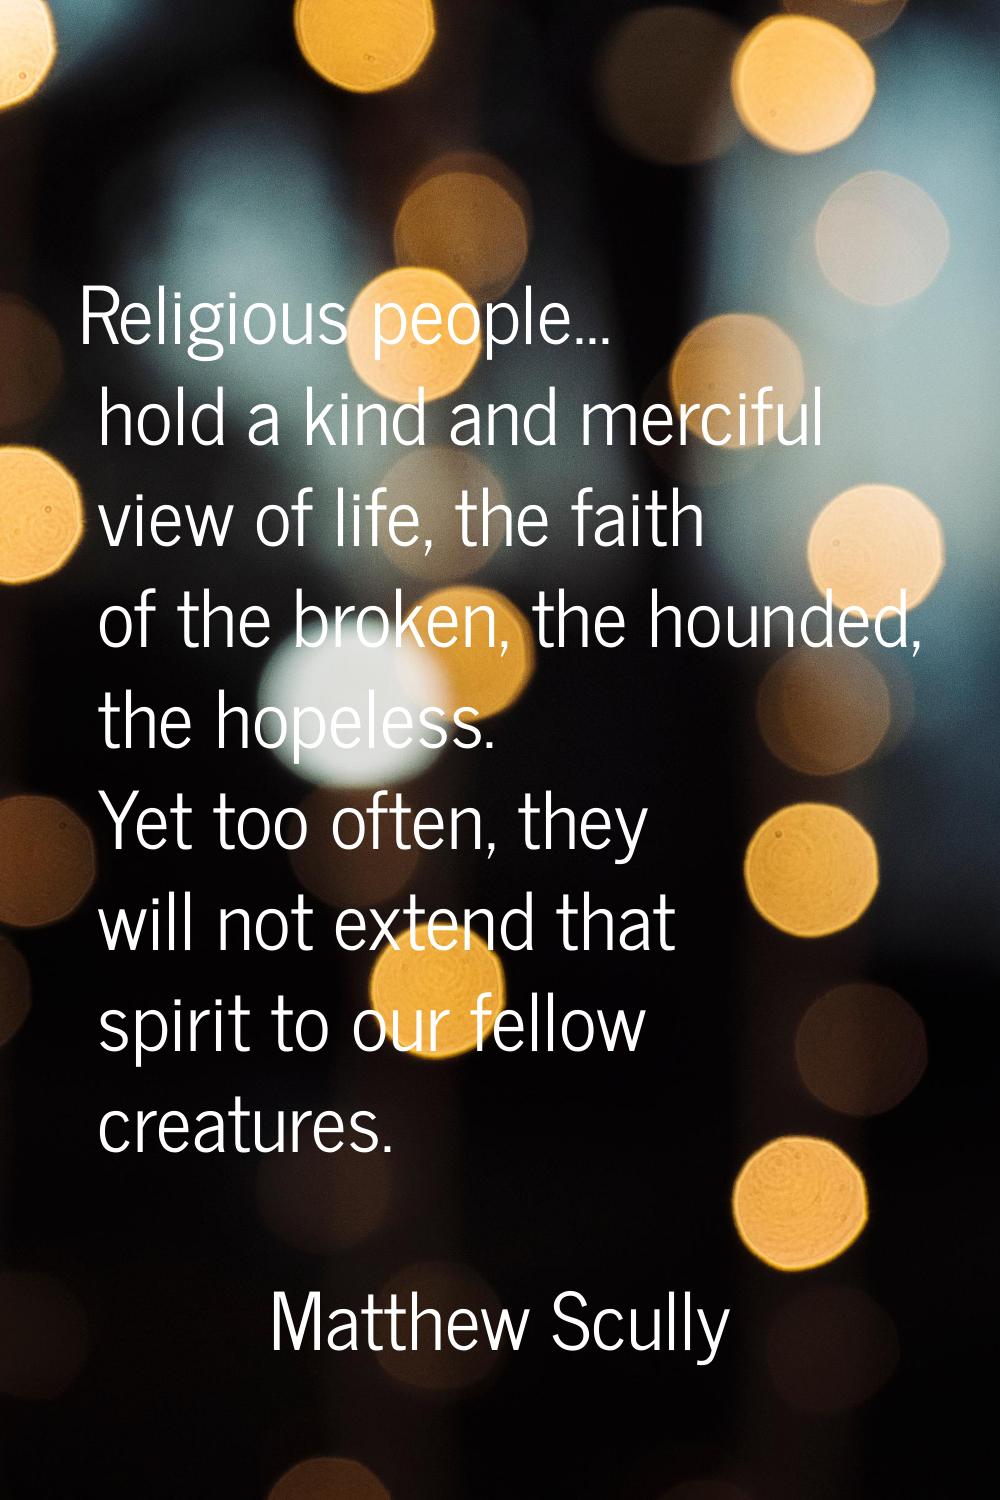 Religious people... hold a kind and merciful view of life, the faith of the broken, the hounded, th